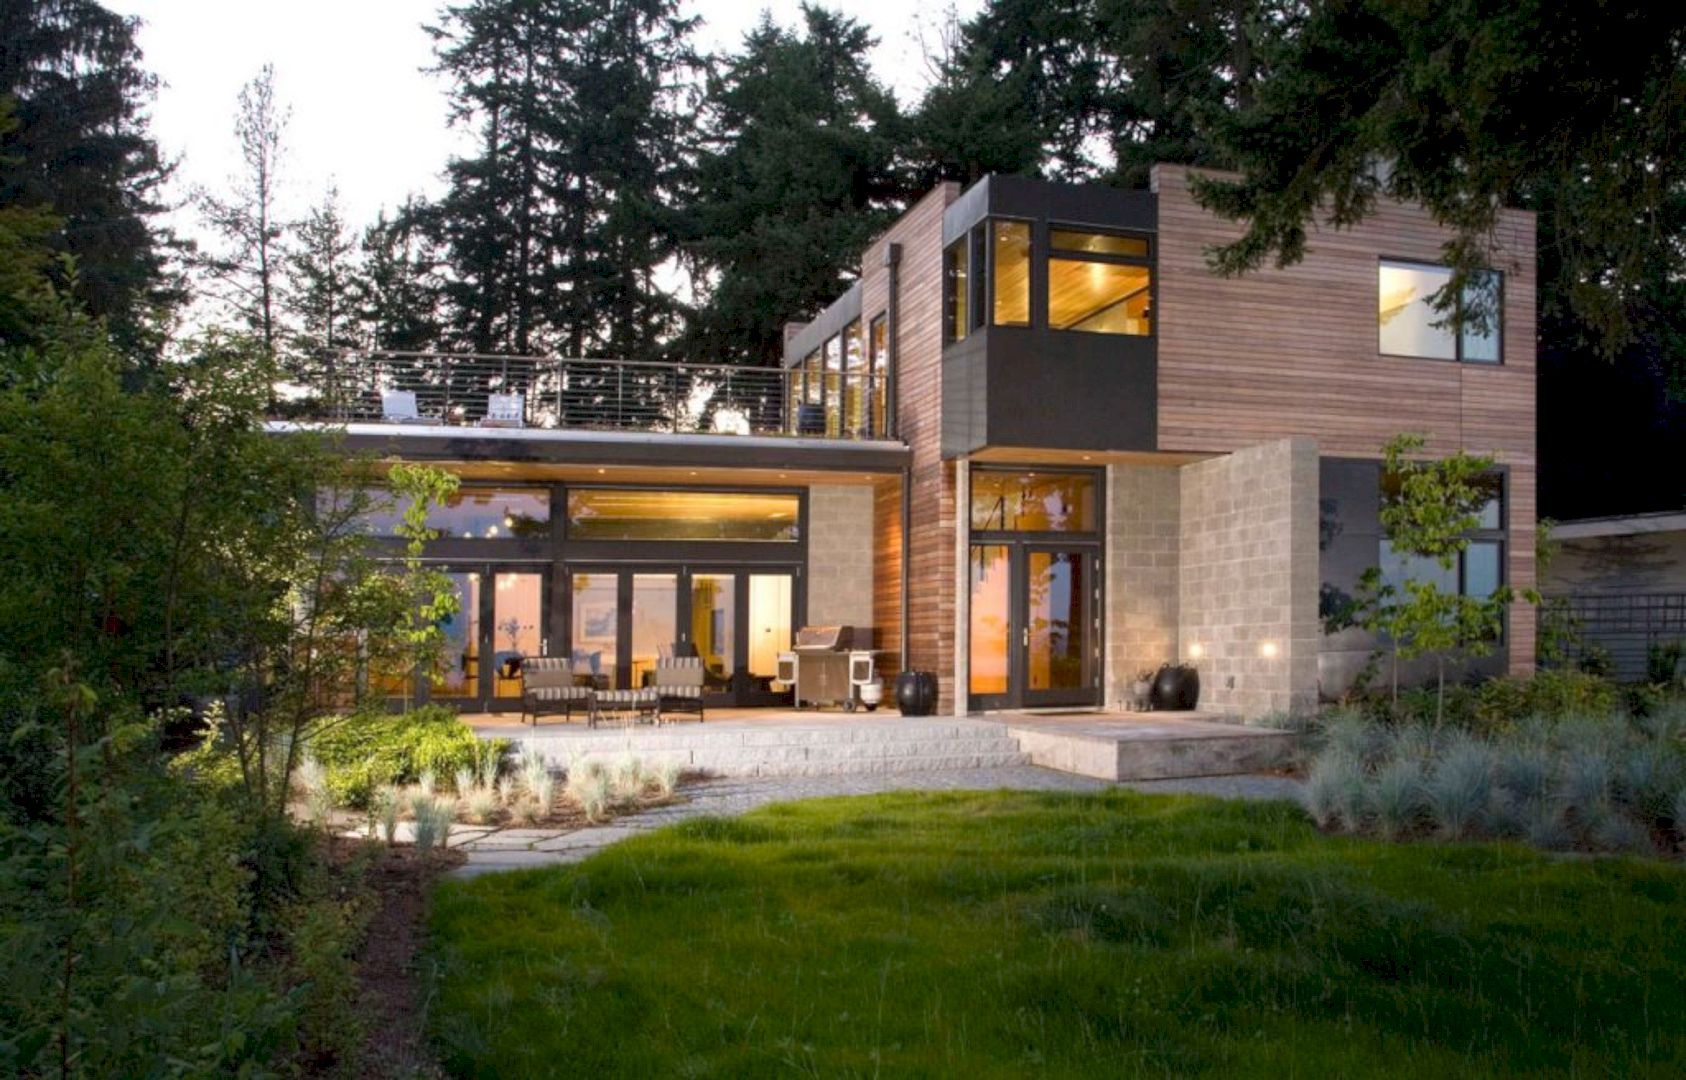 Platinum House: An Environmentally Friendly House with Enjoyable Unique Views